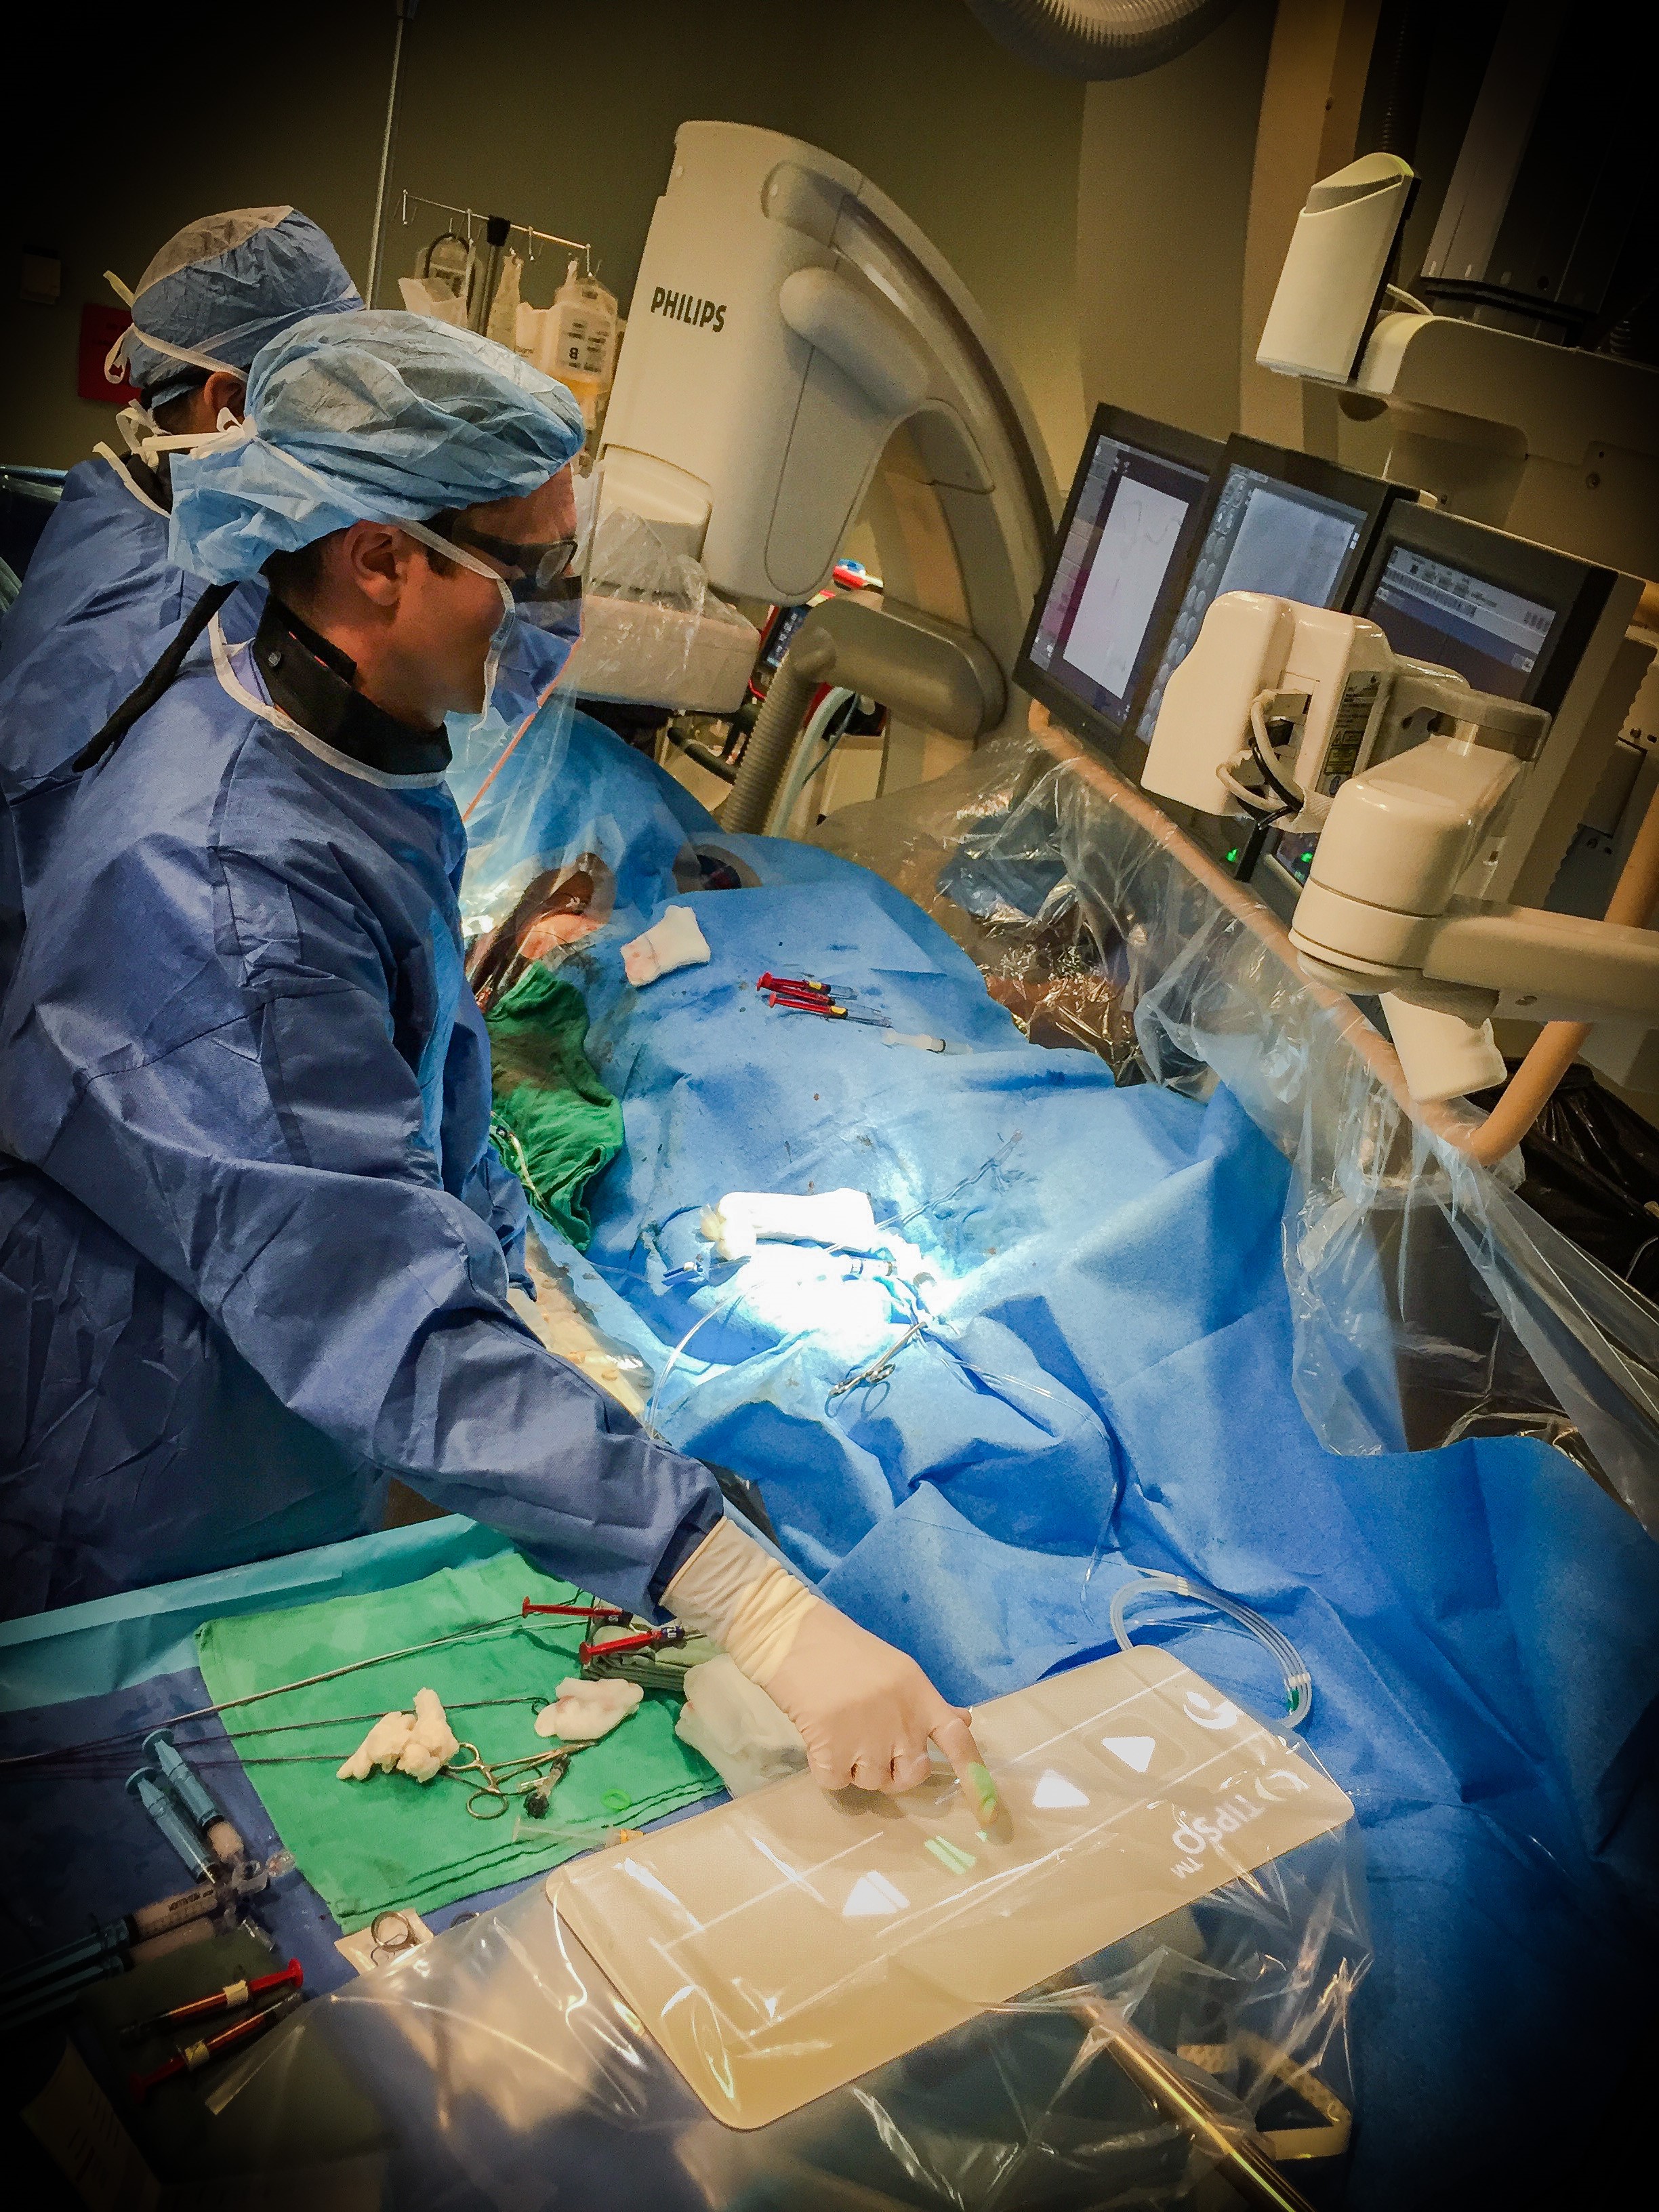 Dr. Behrang Homayoon uses TIPSO Beam during an interventional radiology procedure at Surrey Memorial Hospital. The projected controls are within arm’s length of the doctor and can be used intuitively at the bedside.